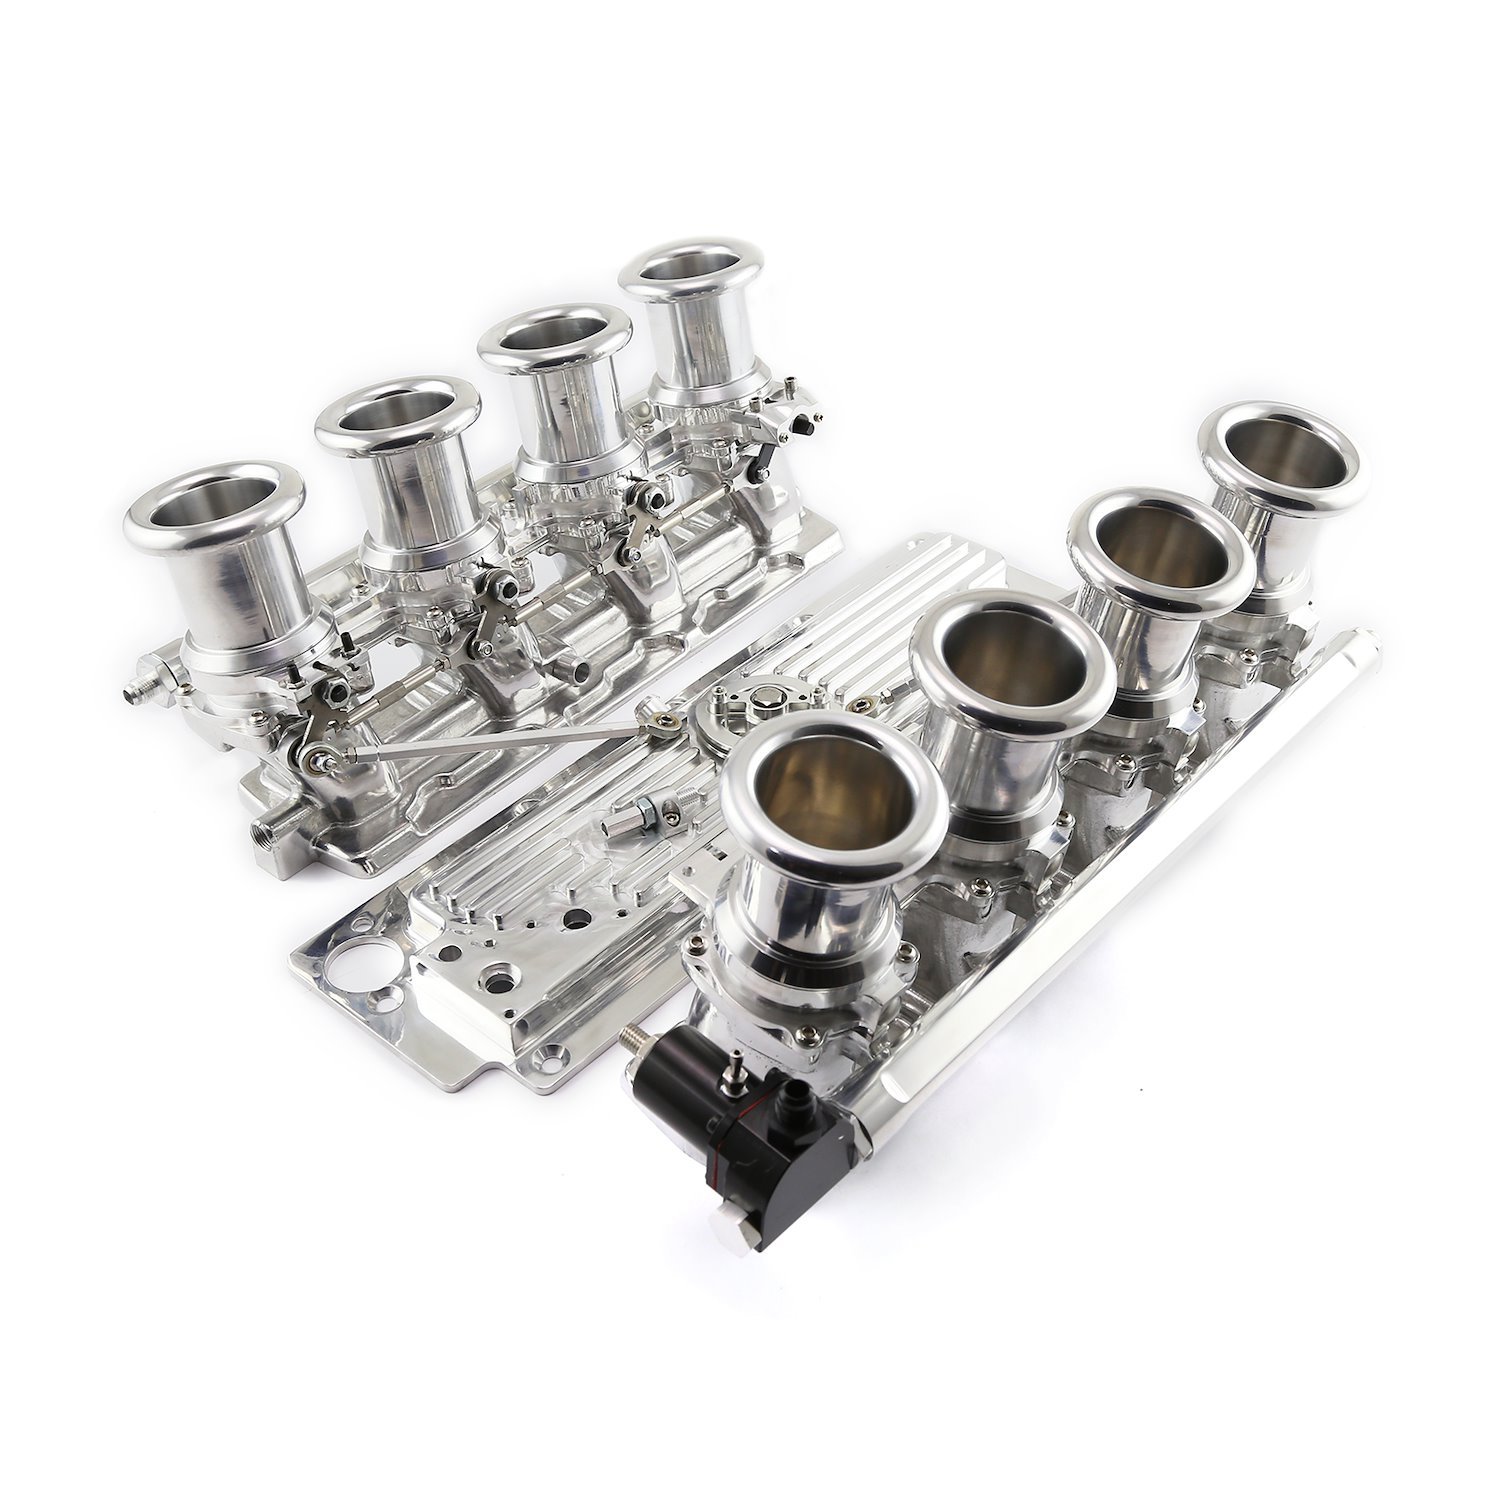 Downdraft EFI Stack Intake Manifold - Chevy LS3 Fuel Injected